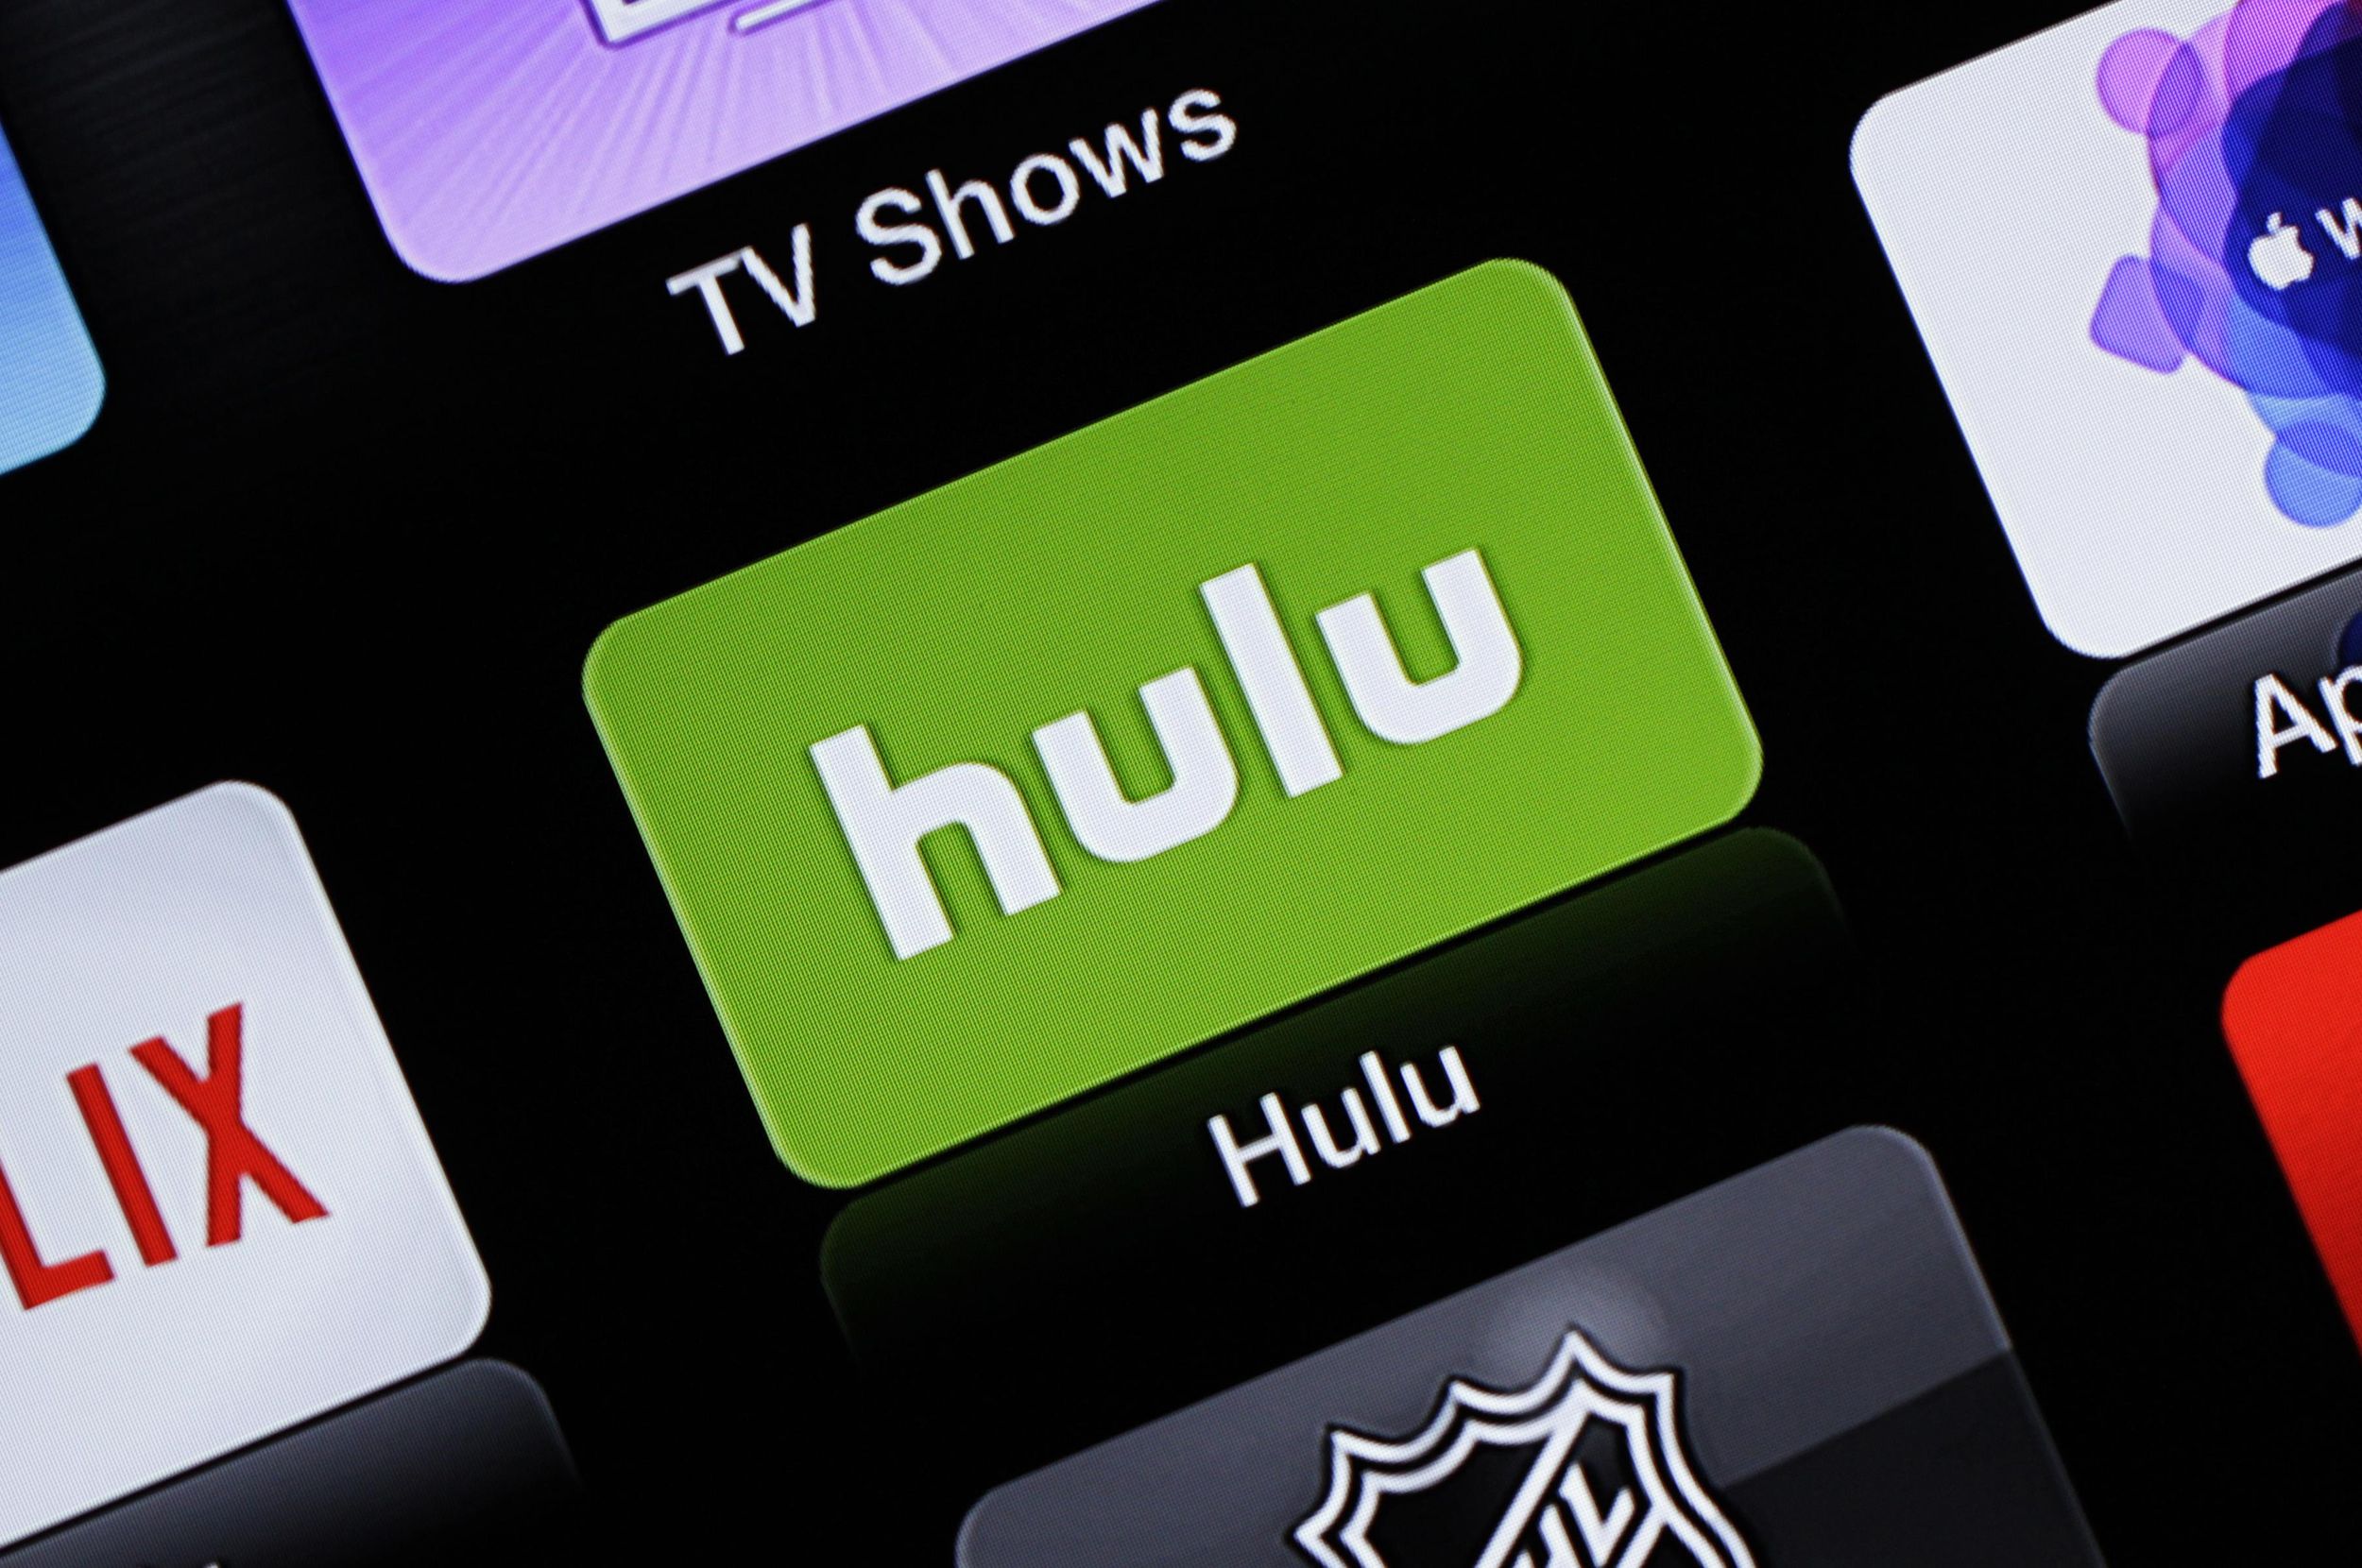 Hulu ups price for liveTV service, cuts basic package price The